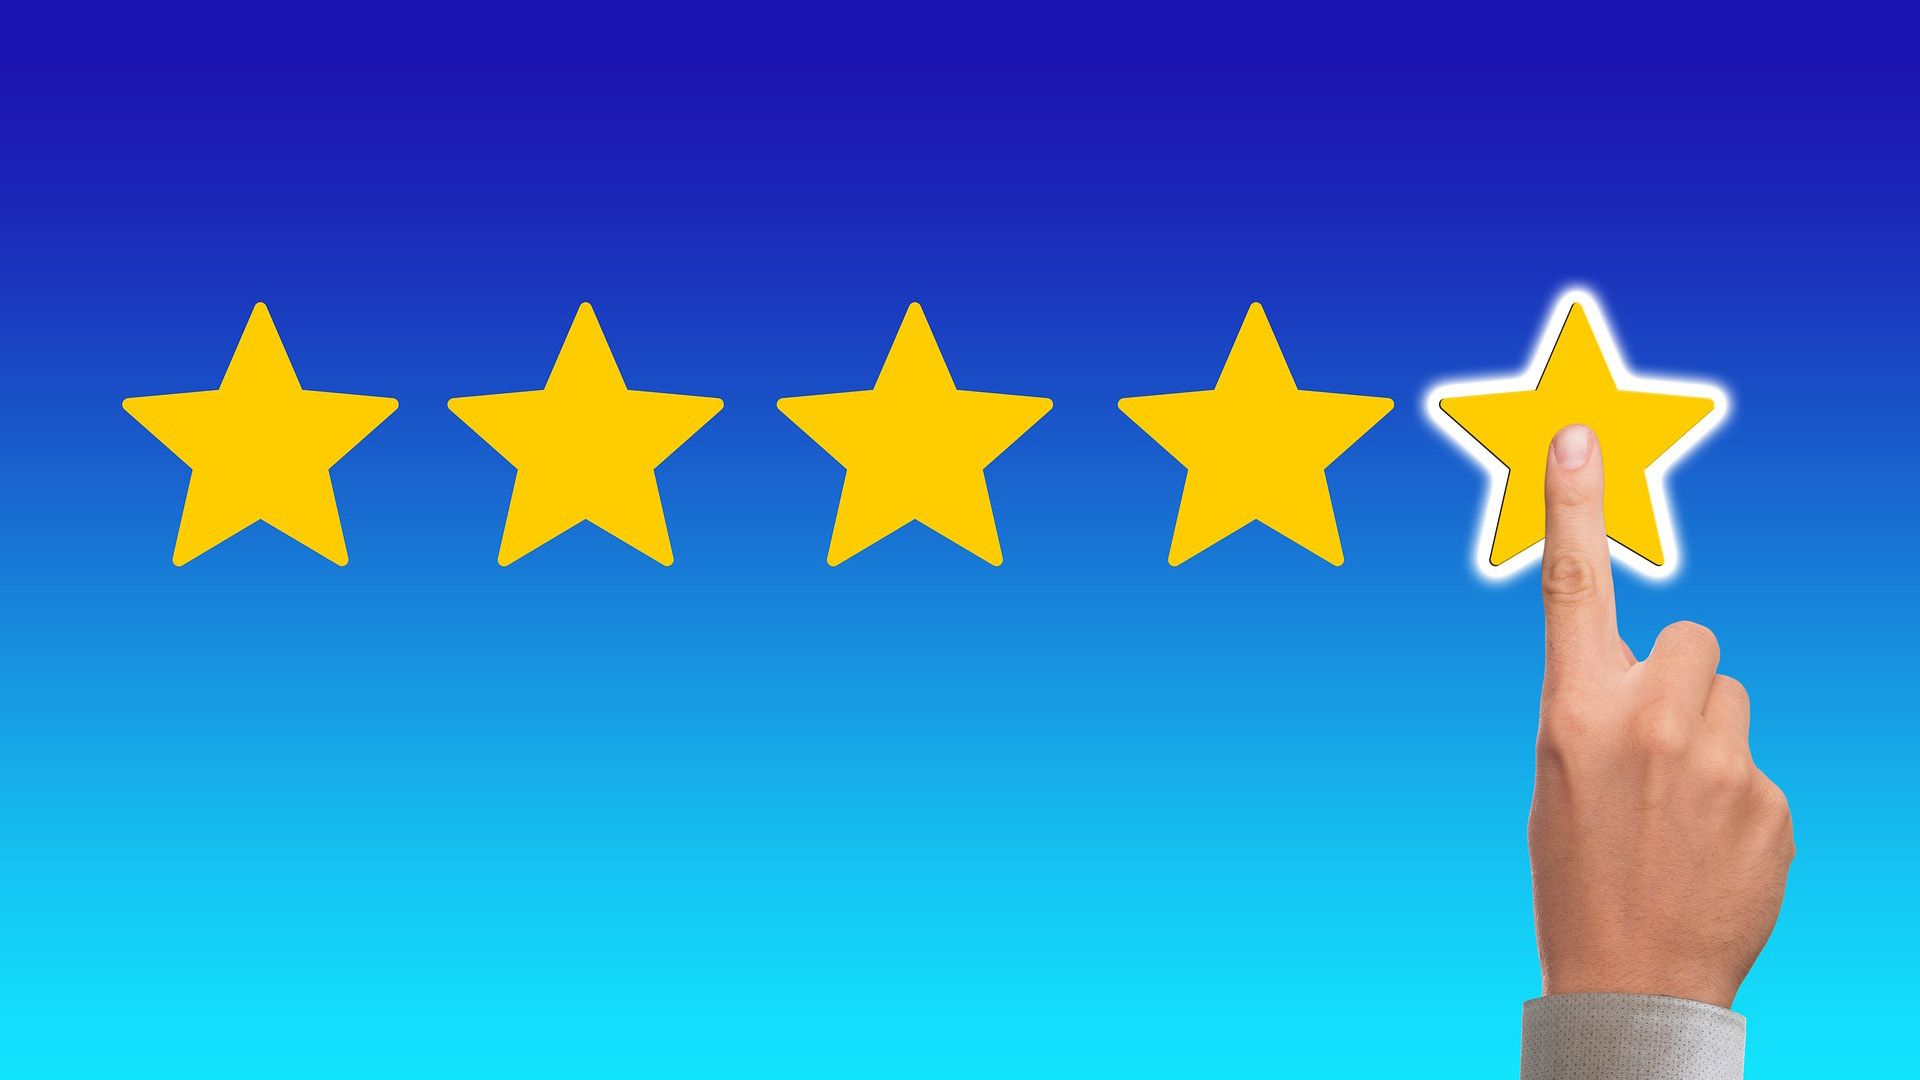 Five stars on a blue background with a man touching the illuminated fifth star. 